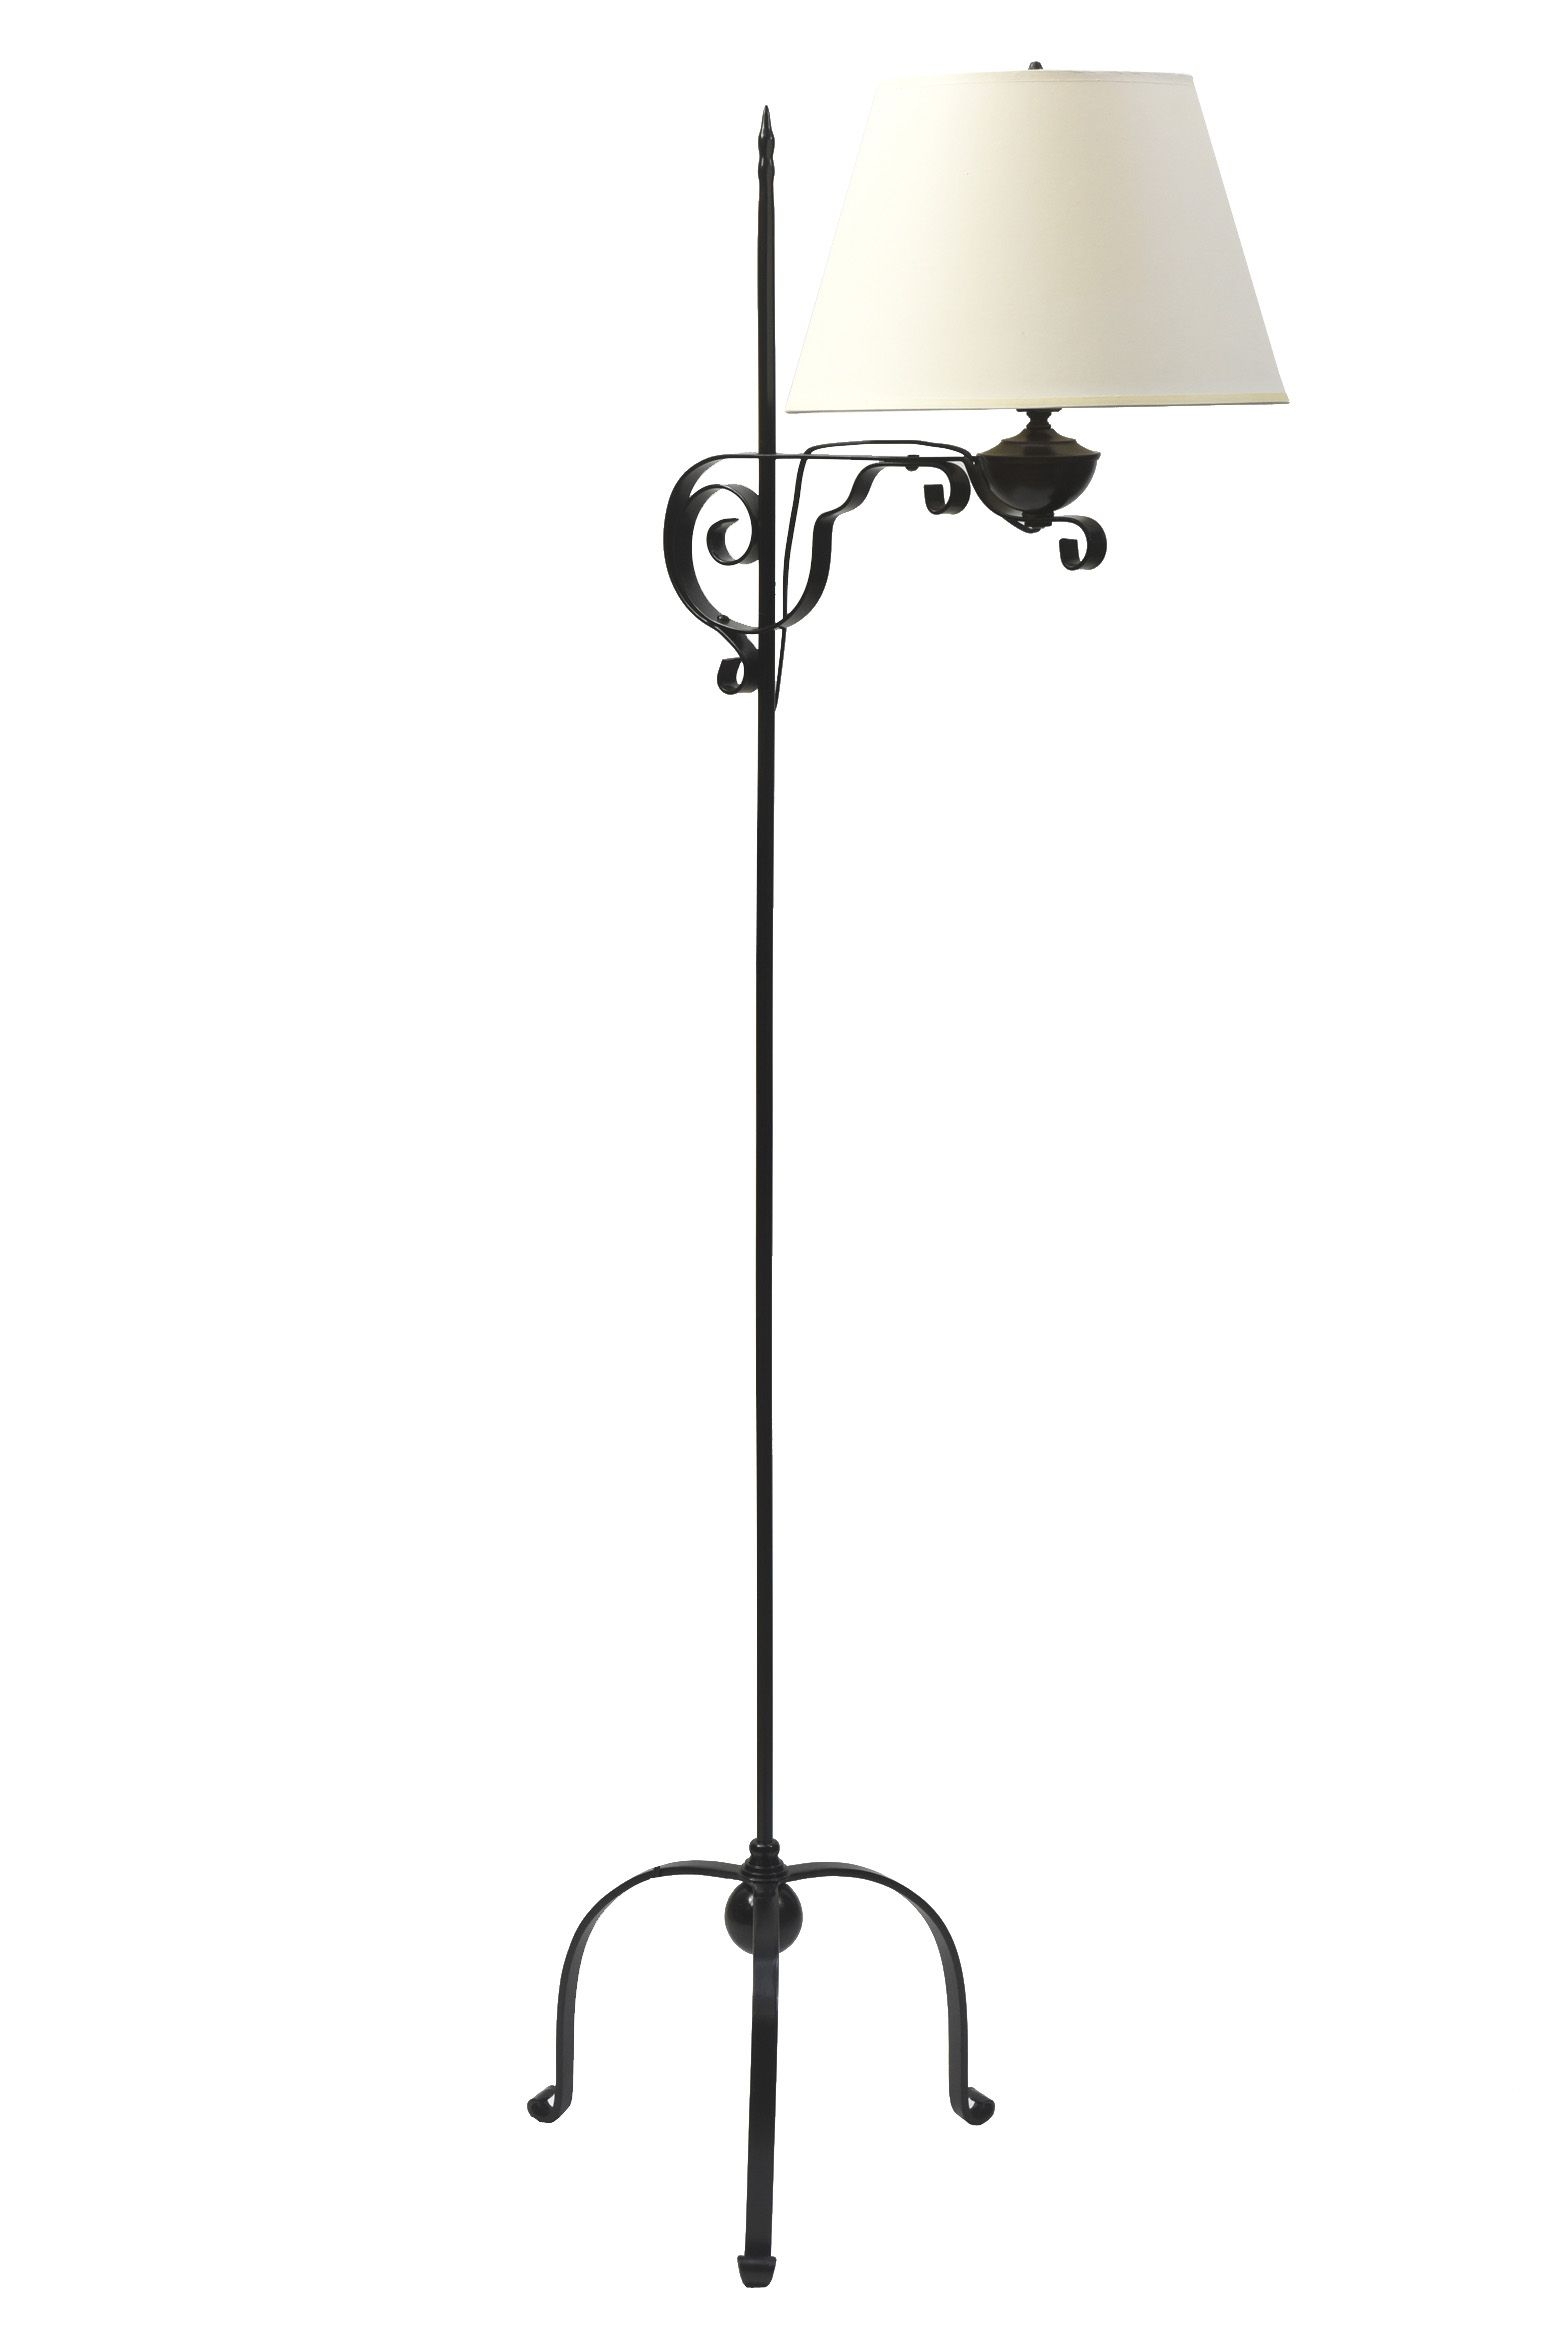 Sold Colonial Style Iron Bridge Lamp Antique Lighting intended for sizing 1555 X 2330